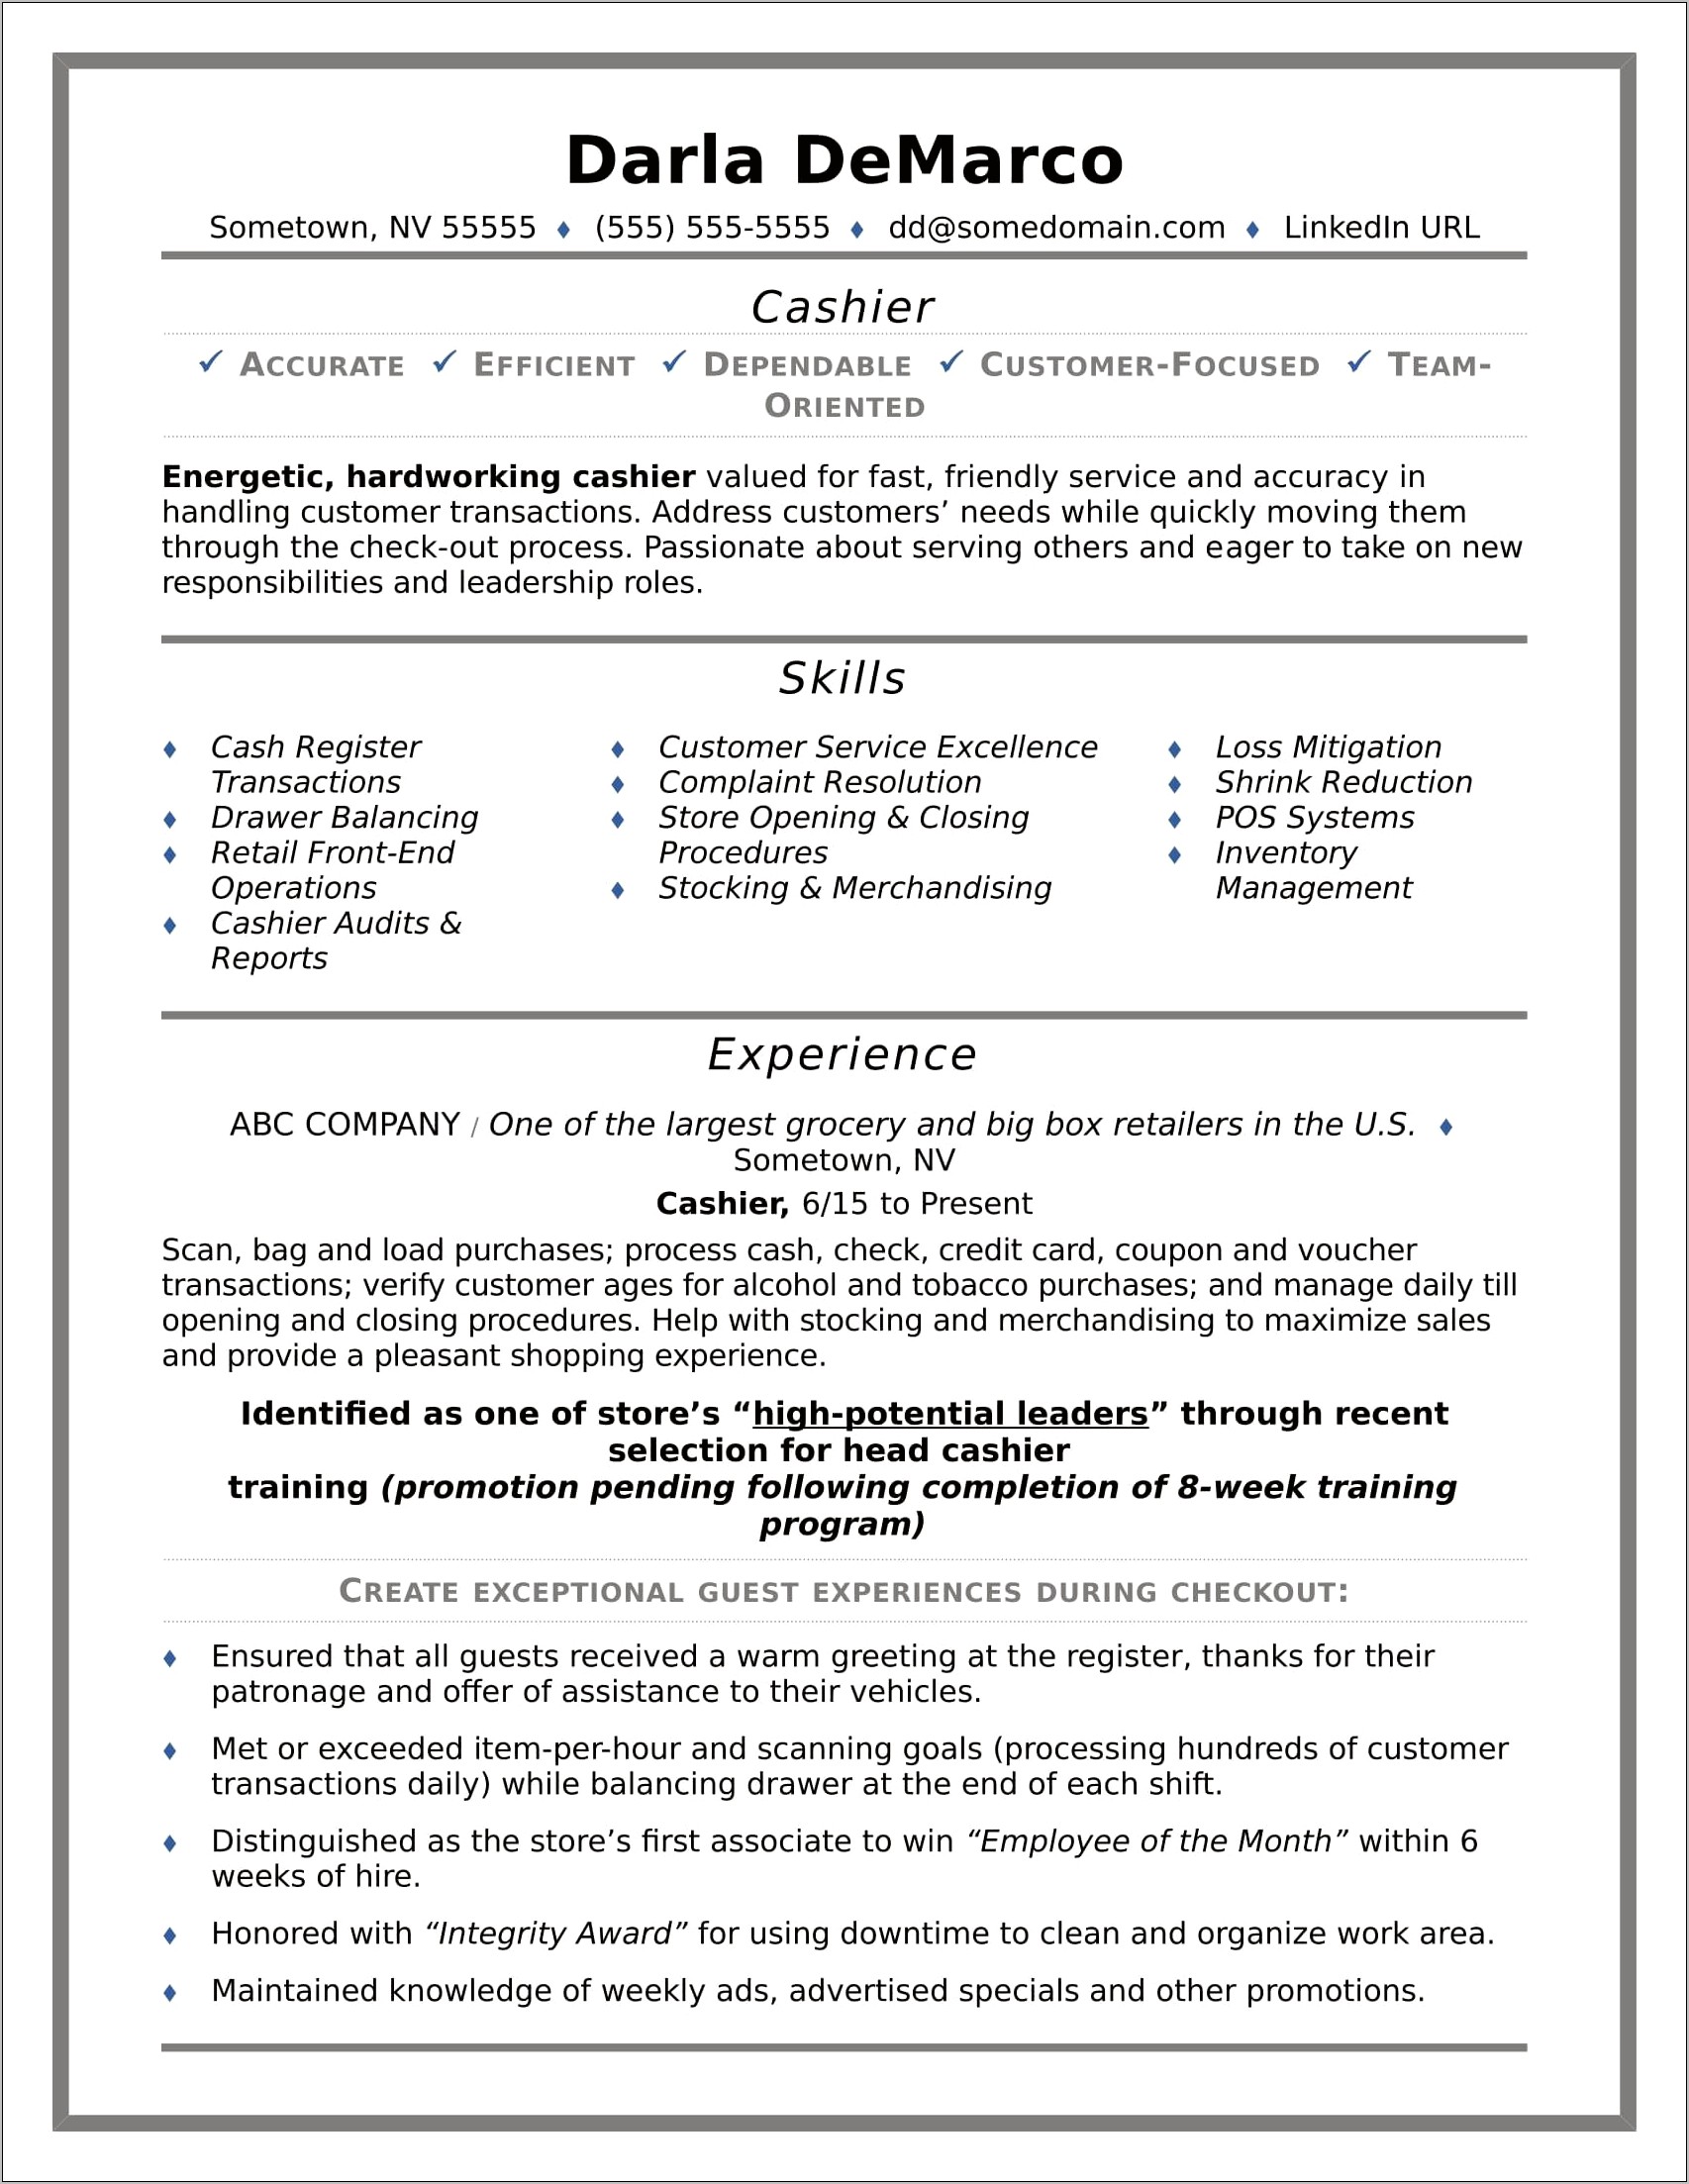 Resume Wording Examples For Works Well With Others